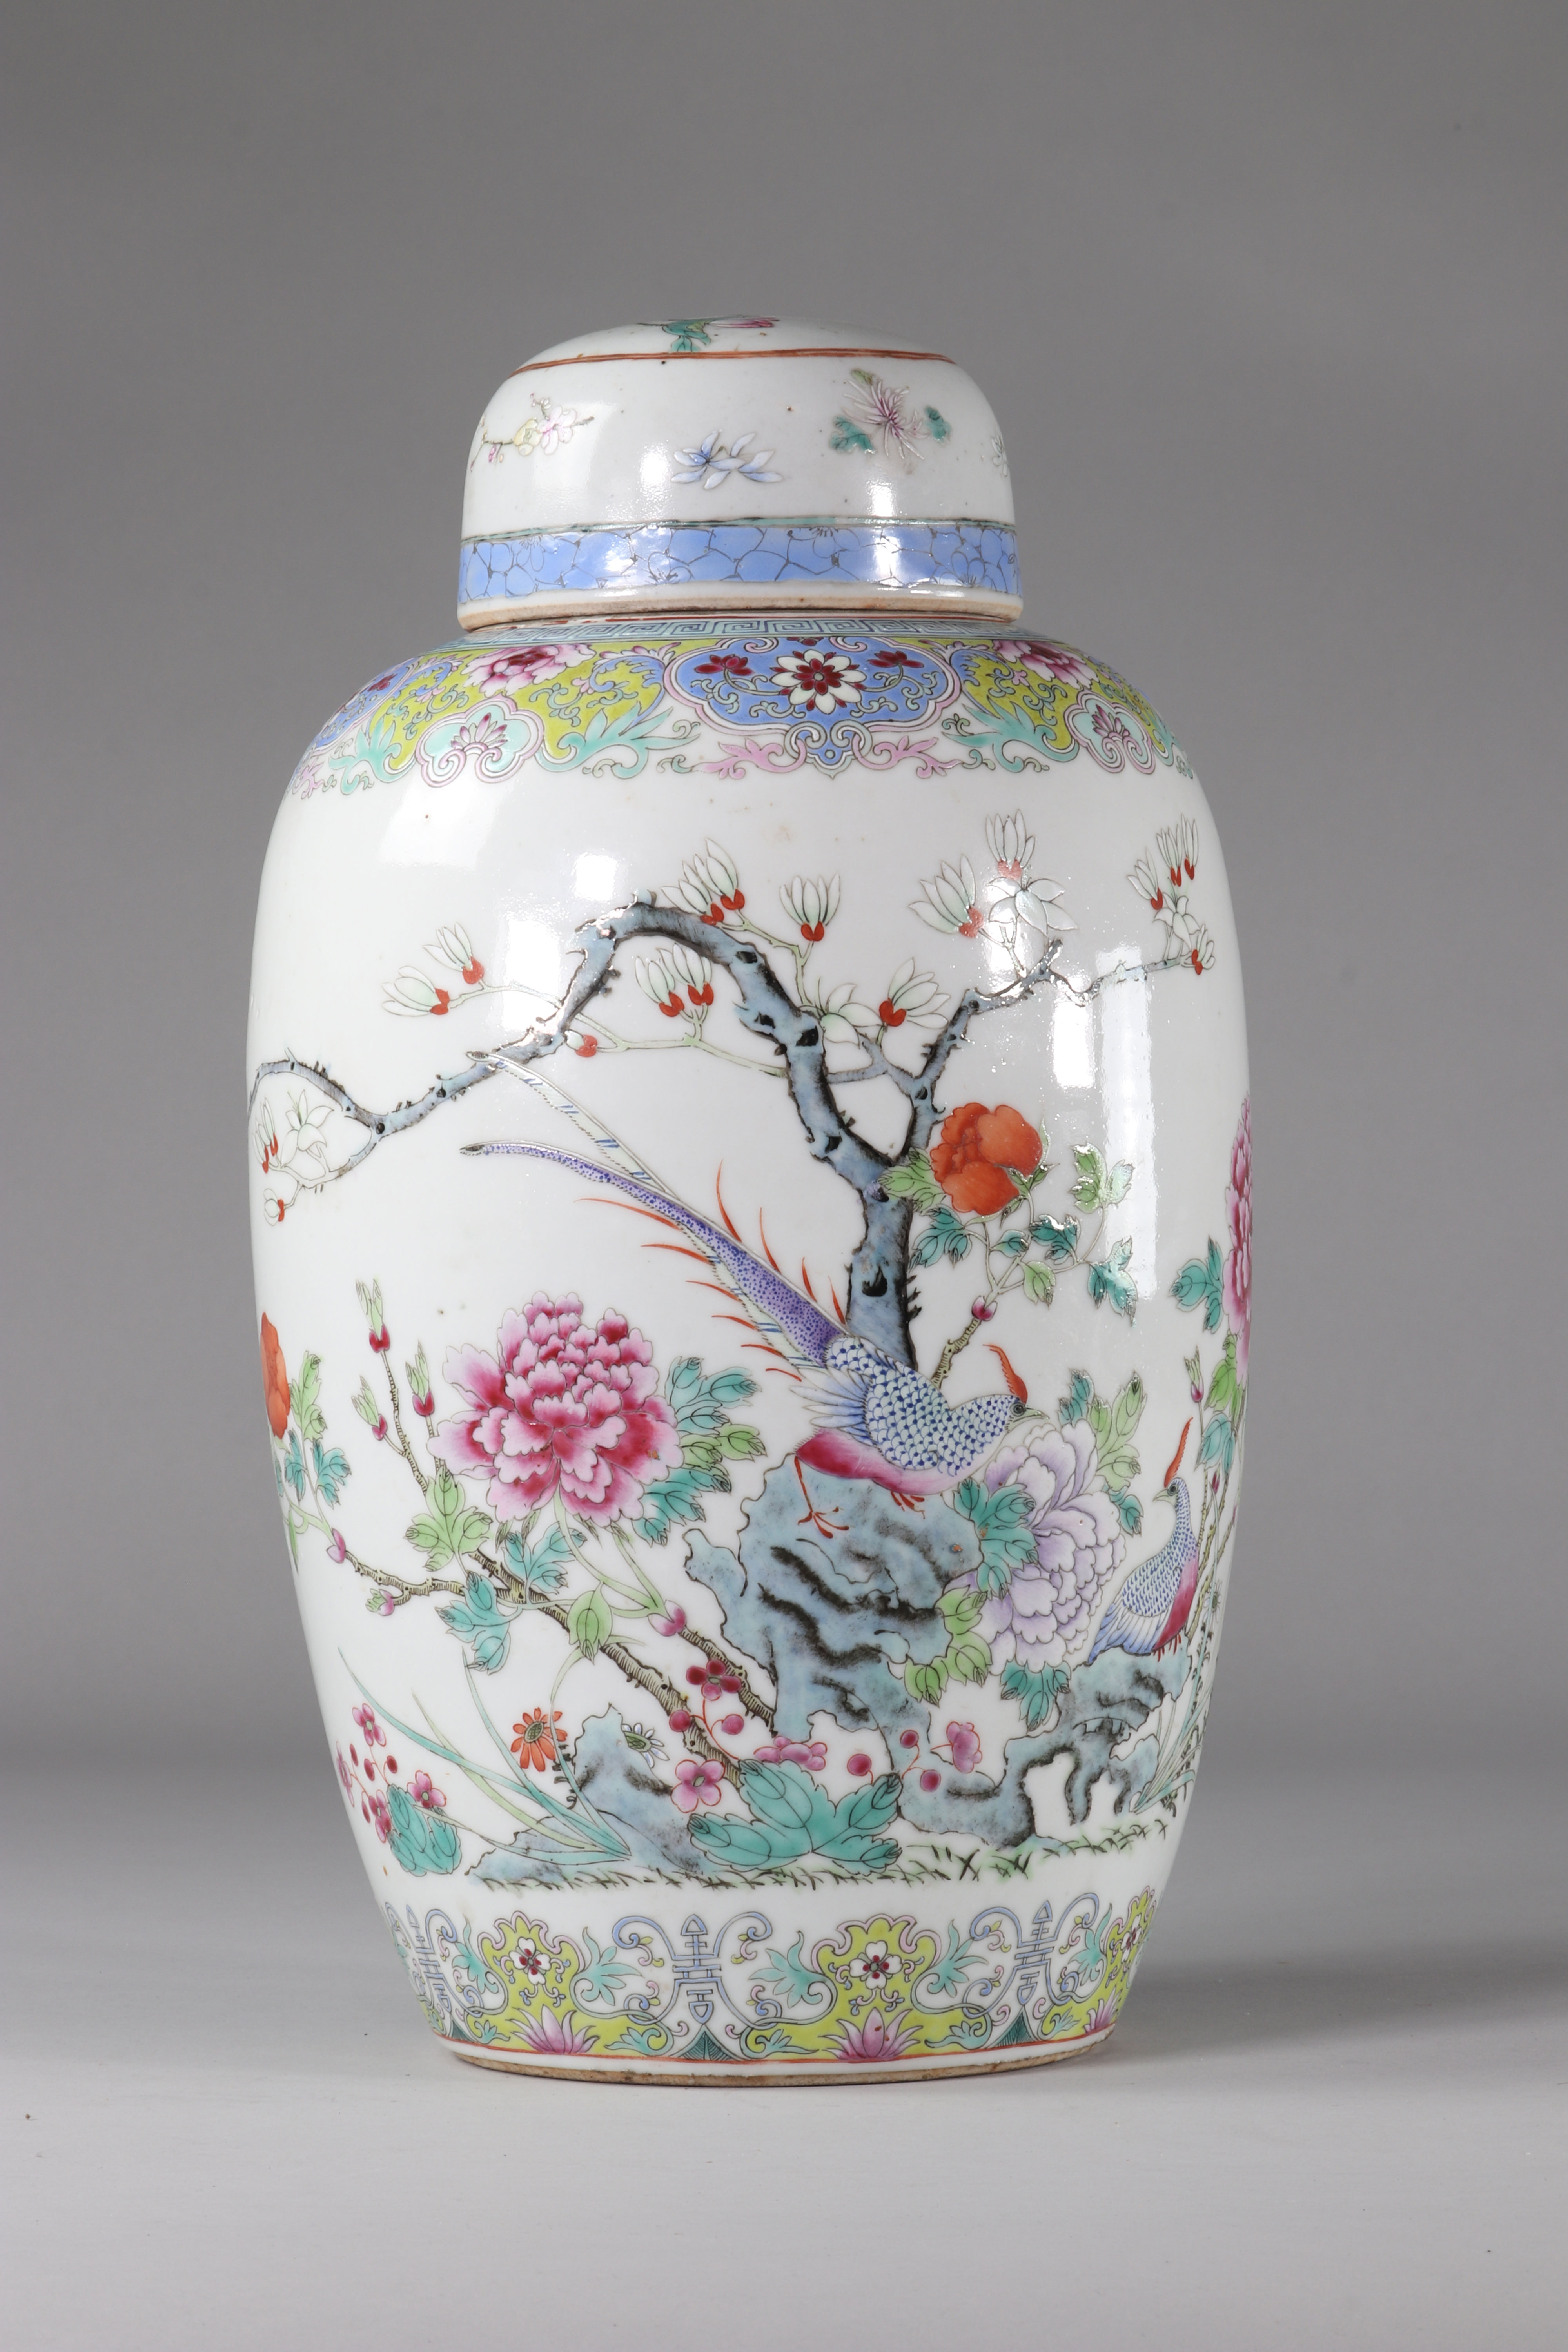 China famille rose porcelain vase decorated with birds and flowers Qing period